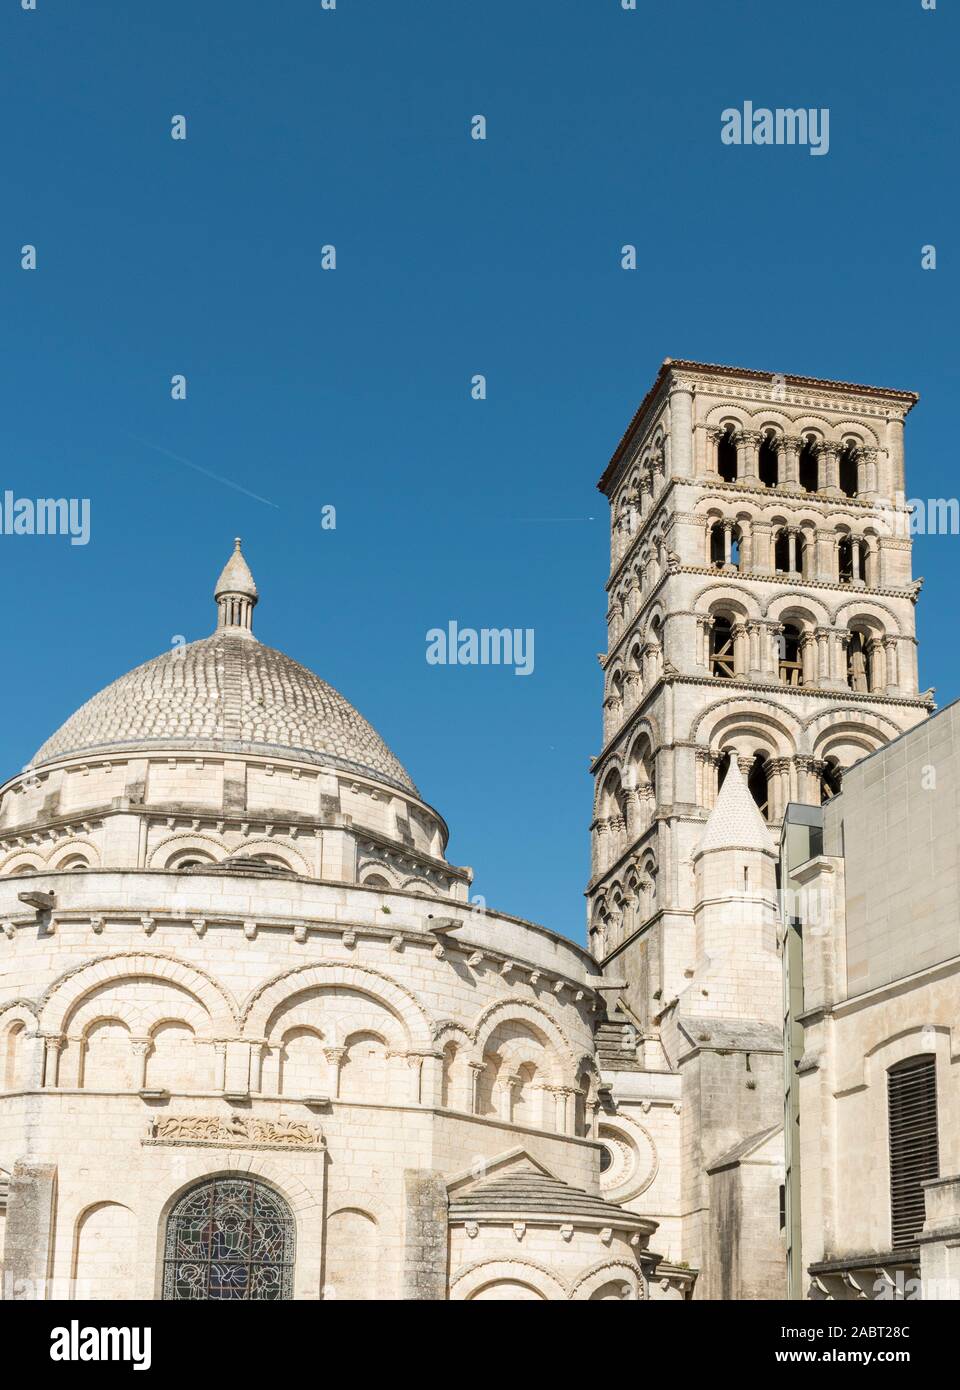 The 12th century Romanesque Cathedral in Angouleme, France Stock Photo